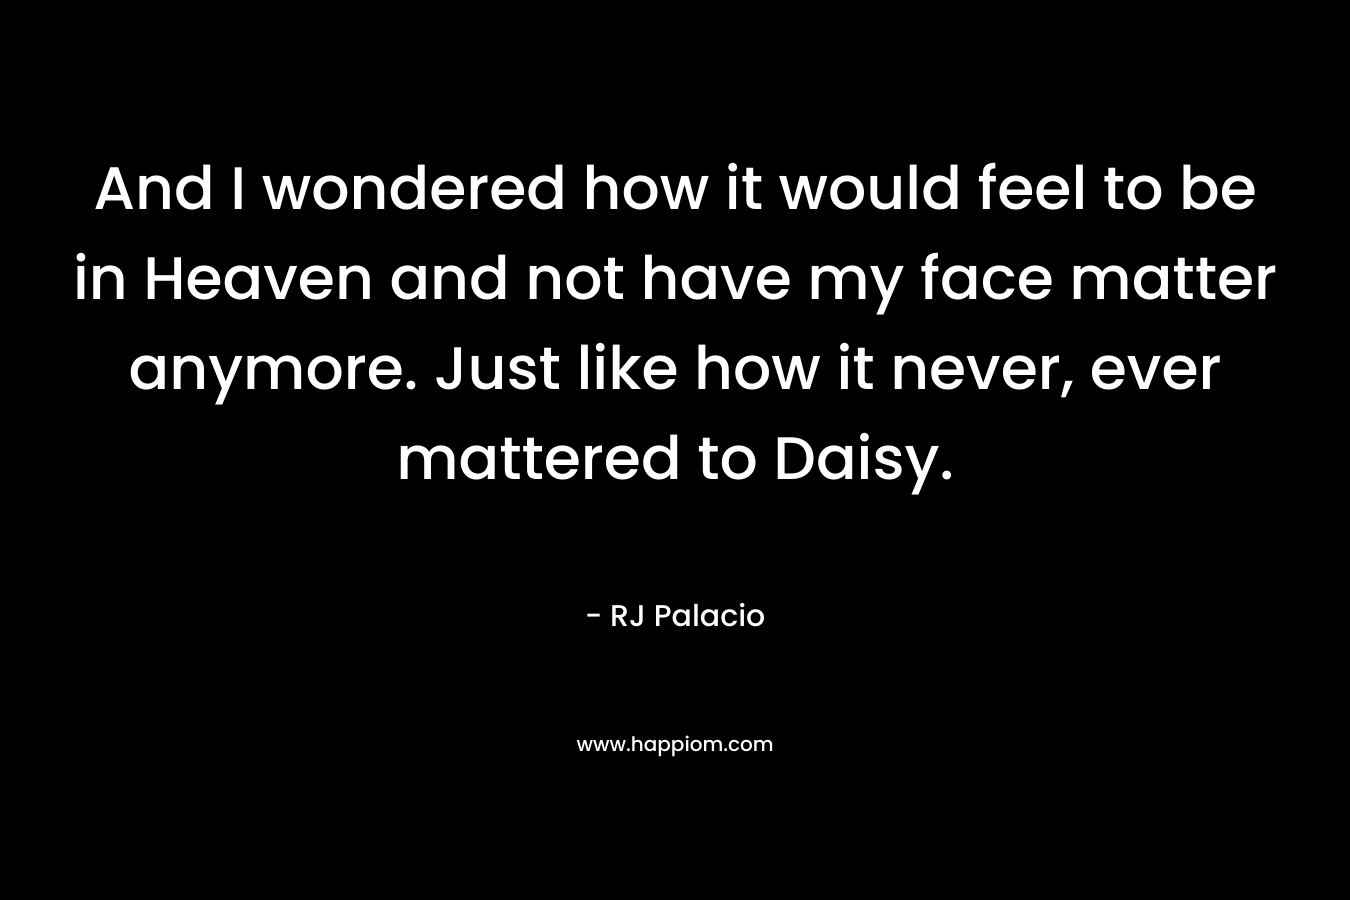 And I wondered how it would feel to be in Heaven and not have my face matter anymore. Just like how it never, ever mattered to Daisy.